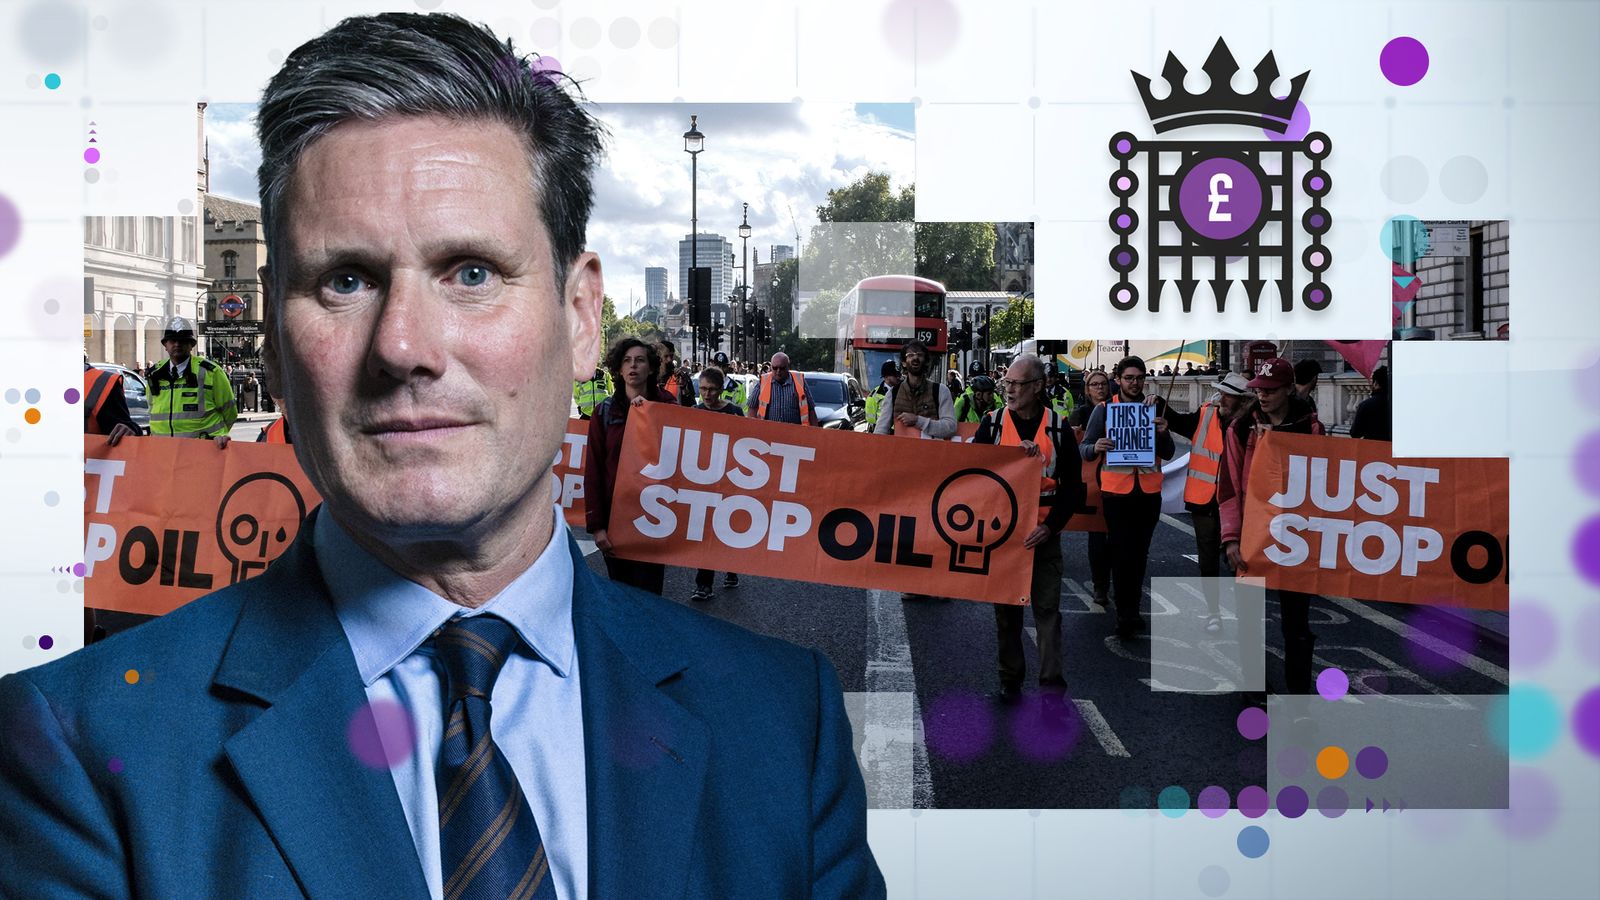 Westminster Accounts: Labour and Starmer have accepted thousands from major Just Stop Oil donor